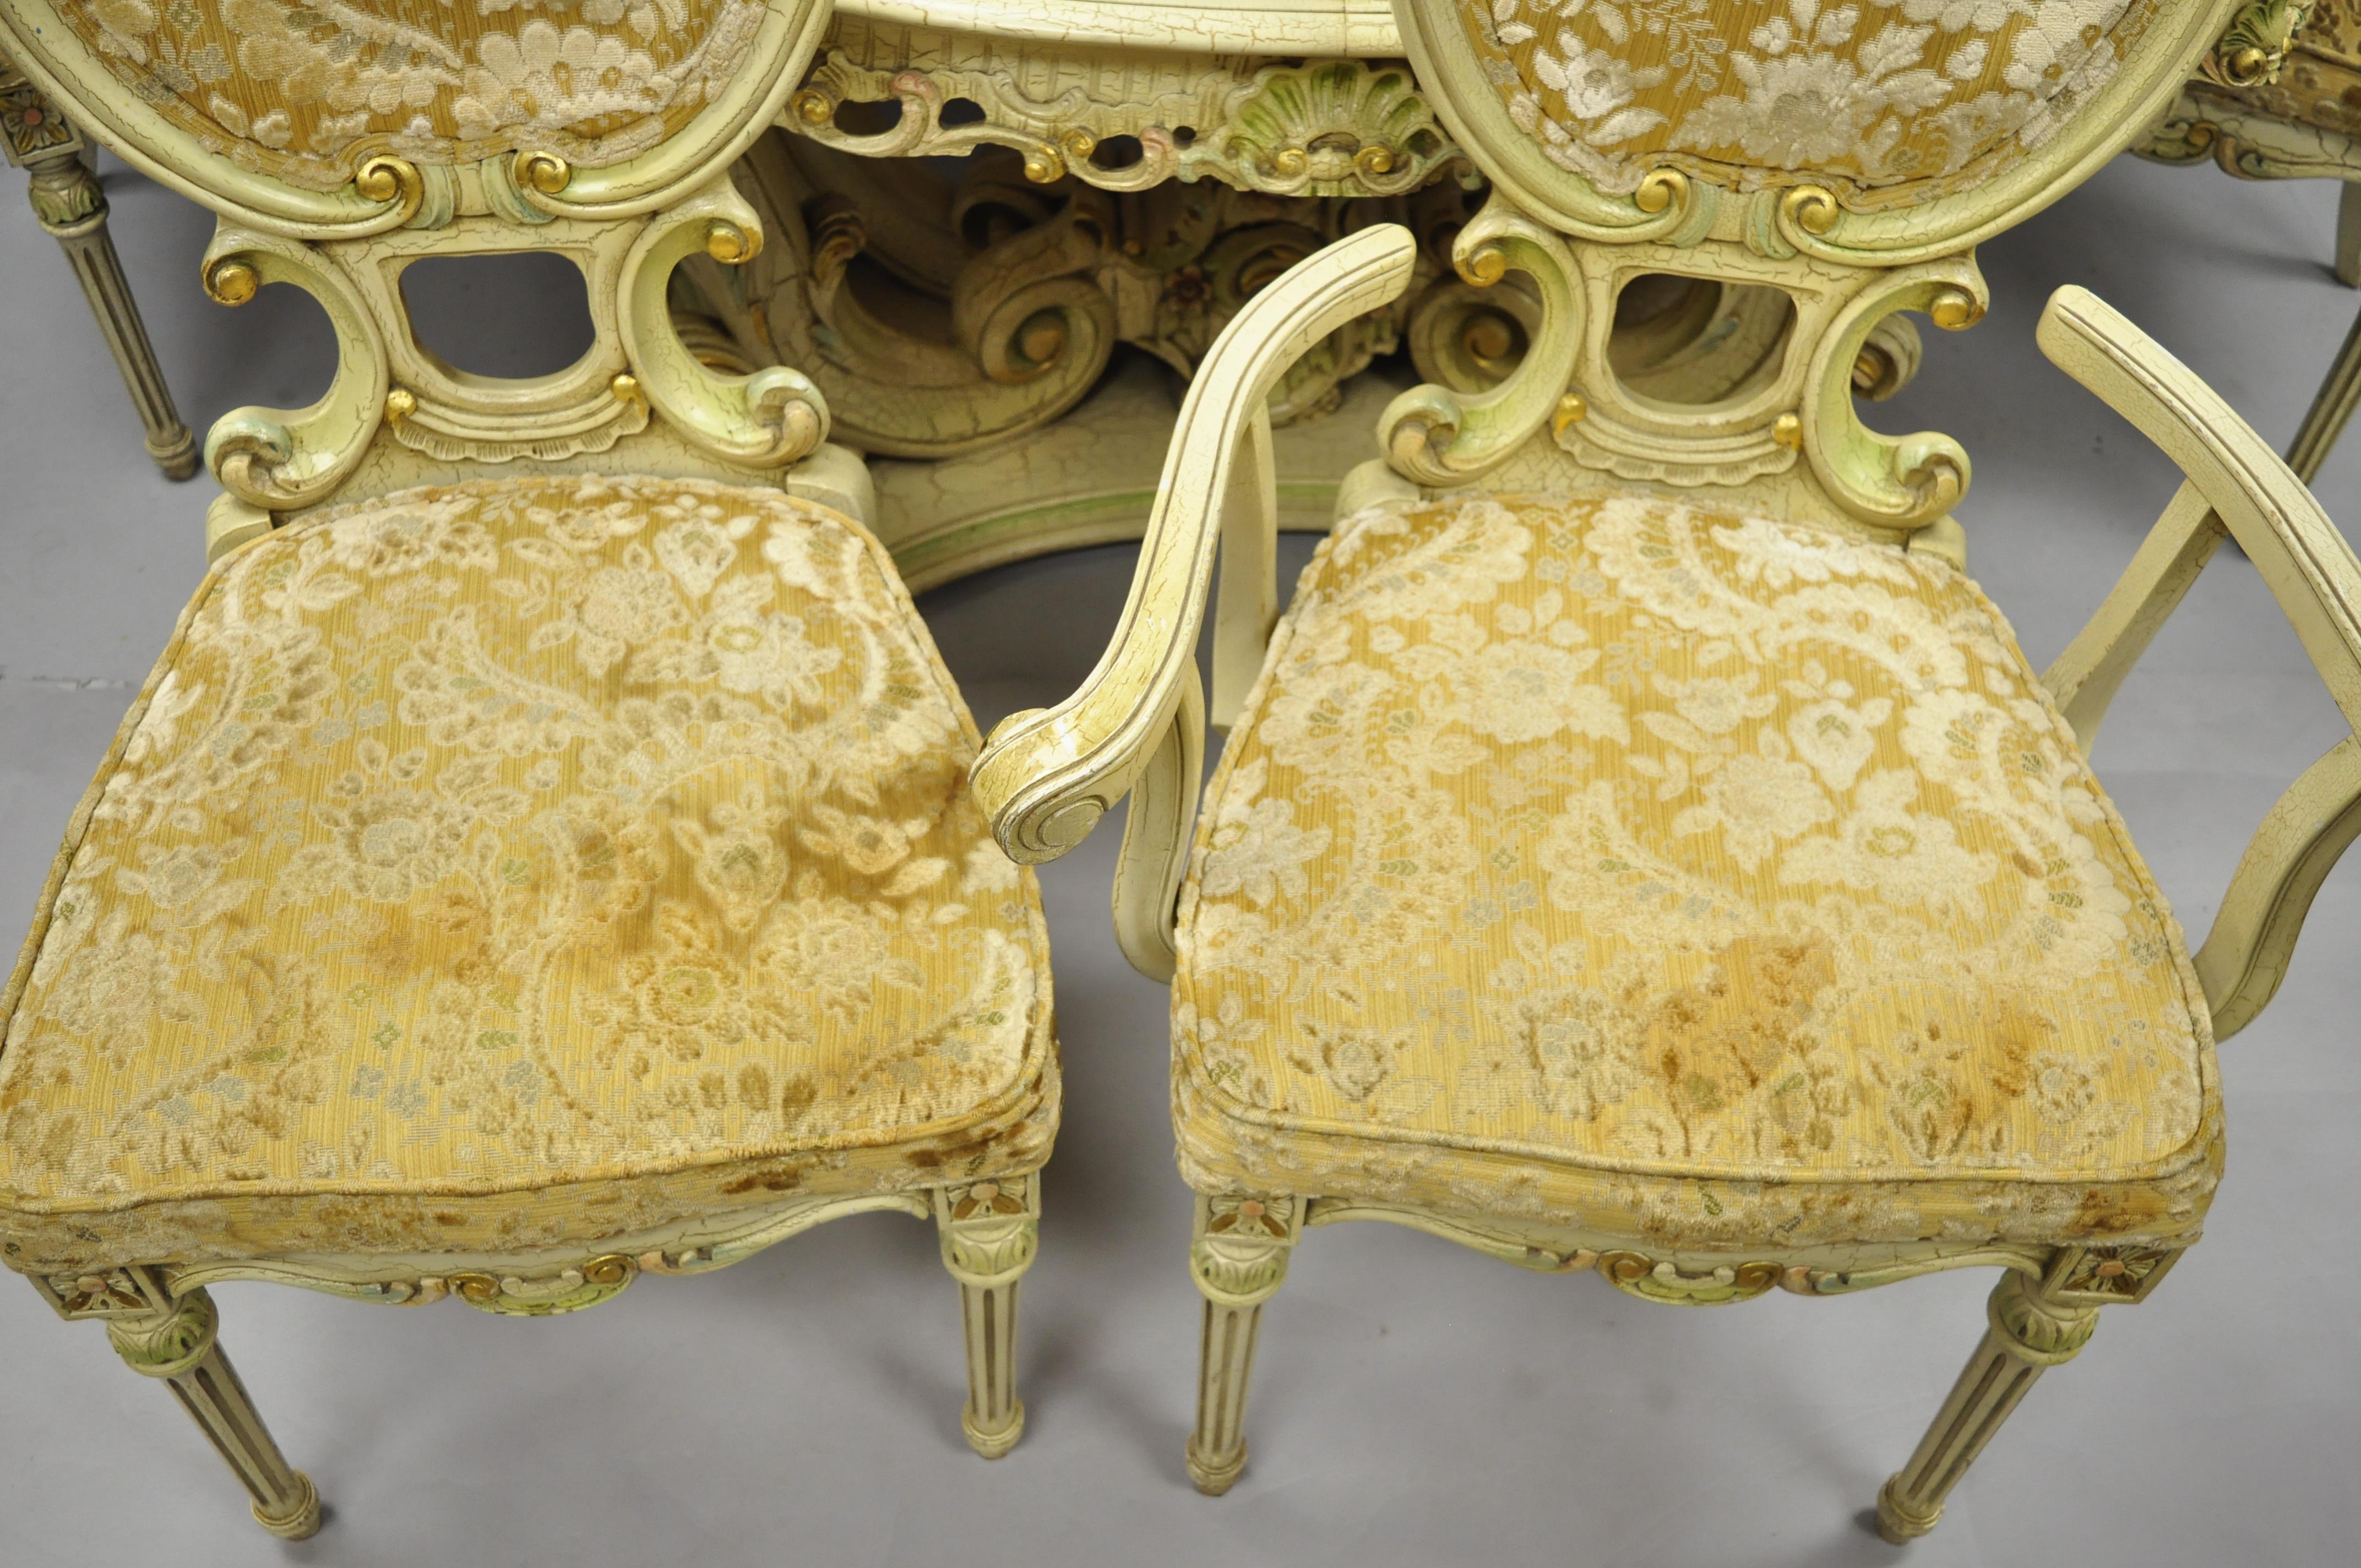 Silik Style Italian Baroque Rococo Dining Room Set by John Turano & Sons In Good Condition For Sale In Philadelphia, PA